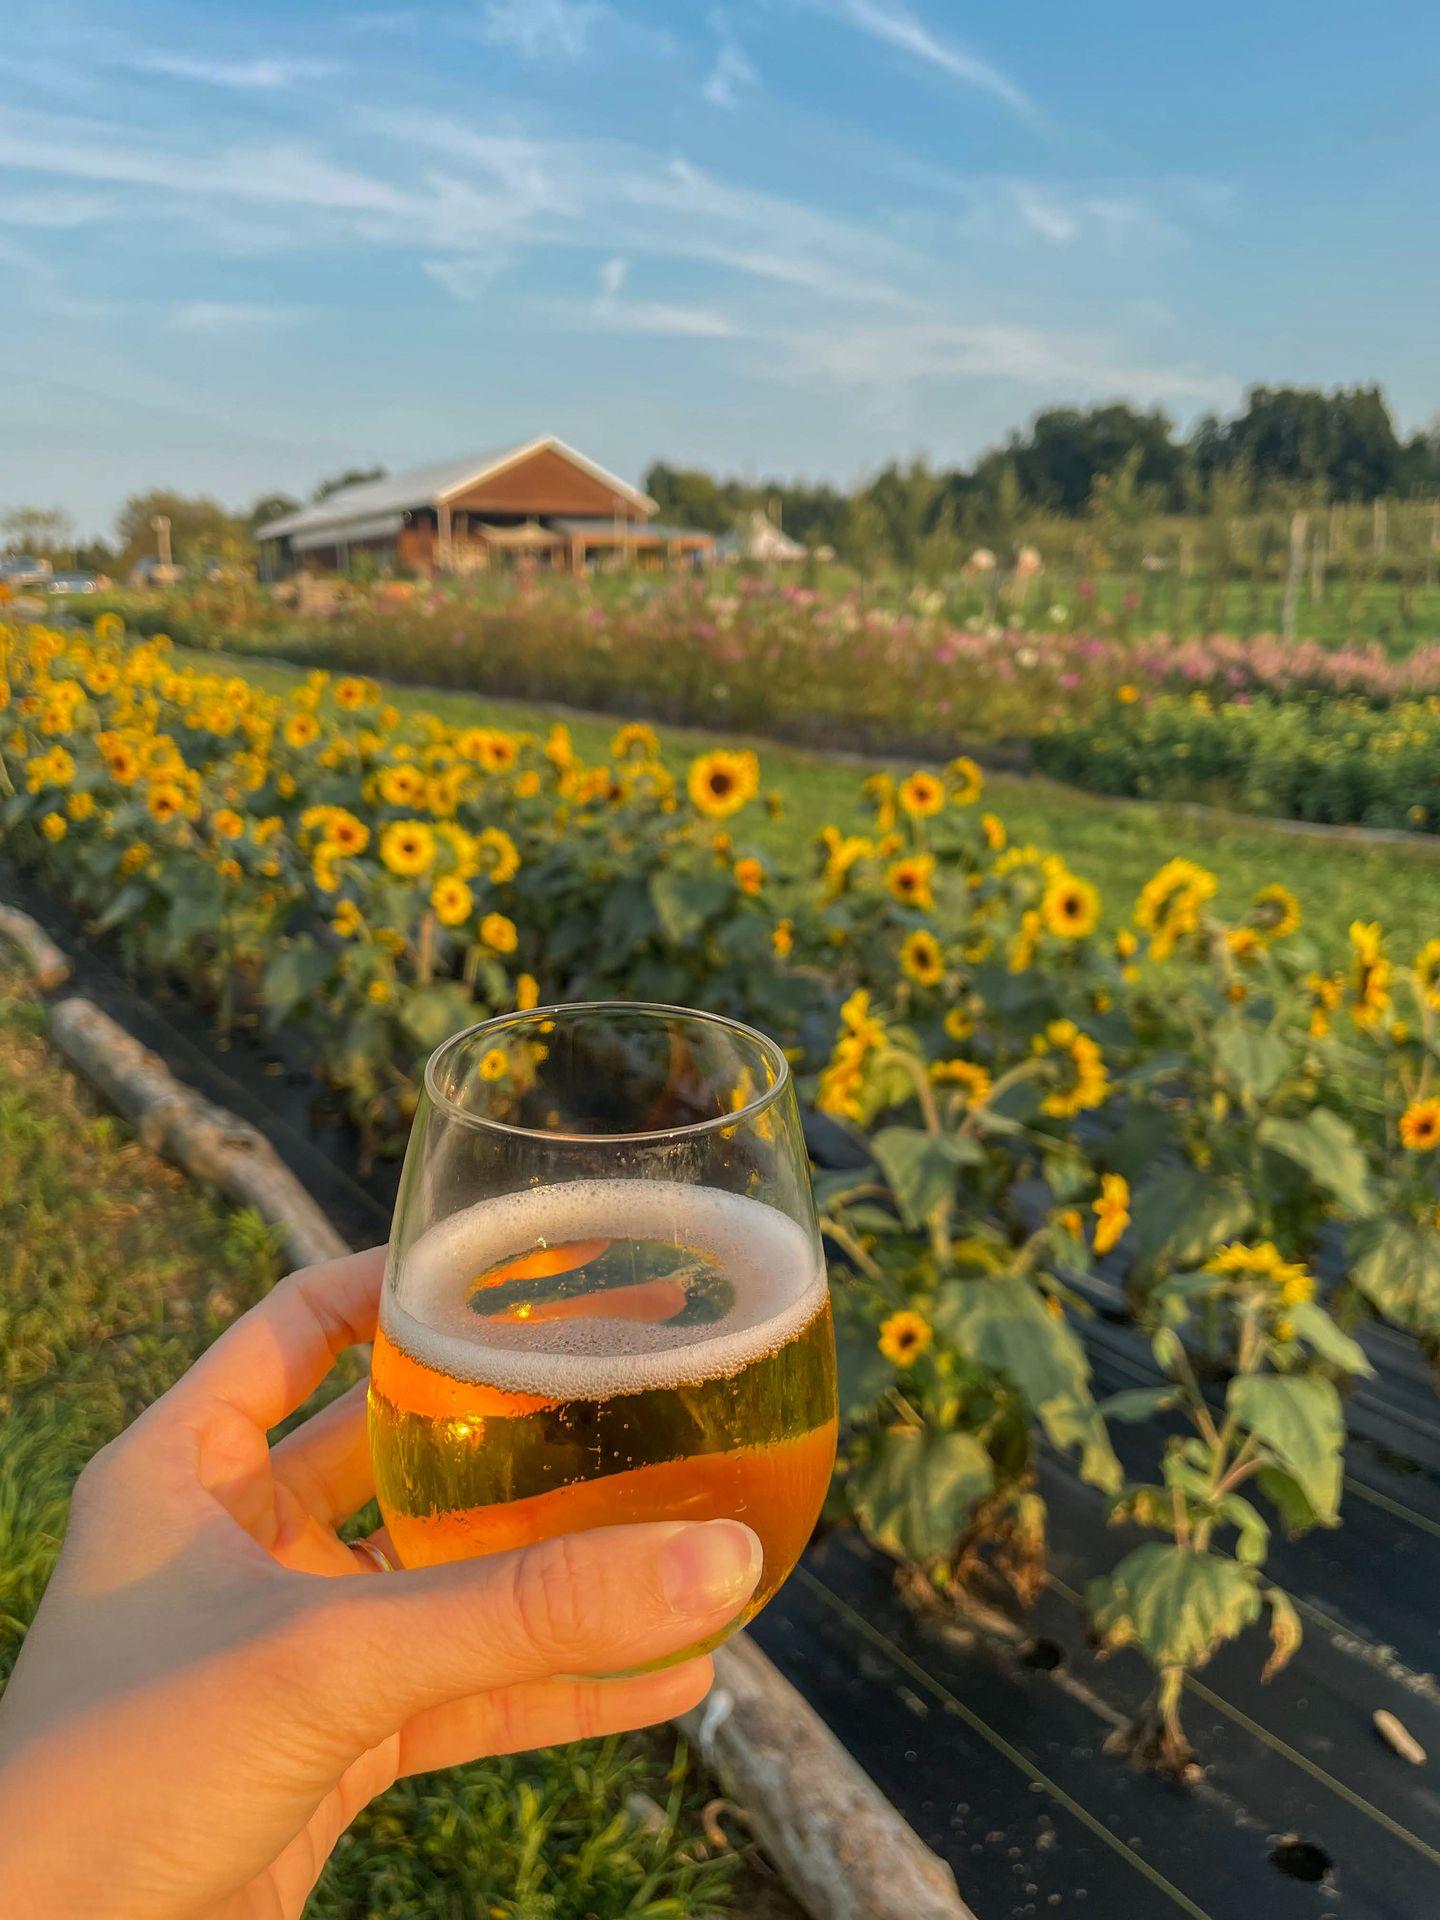 Holding up a glass of cider in front of rows of sunflowers.